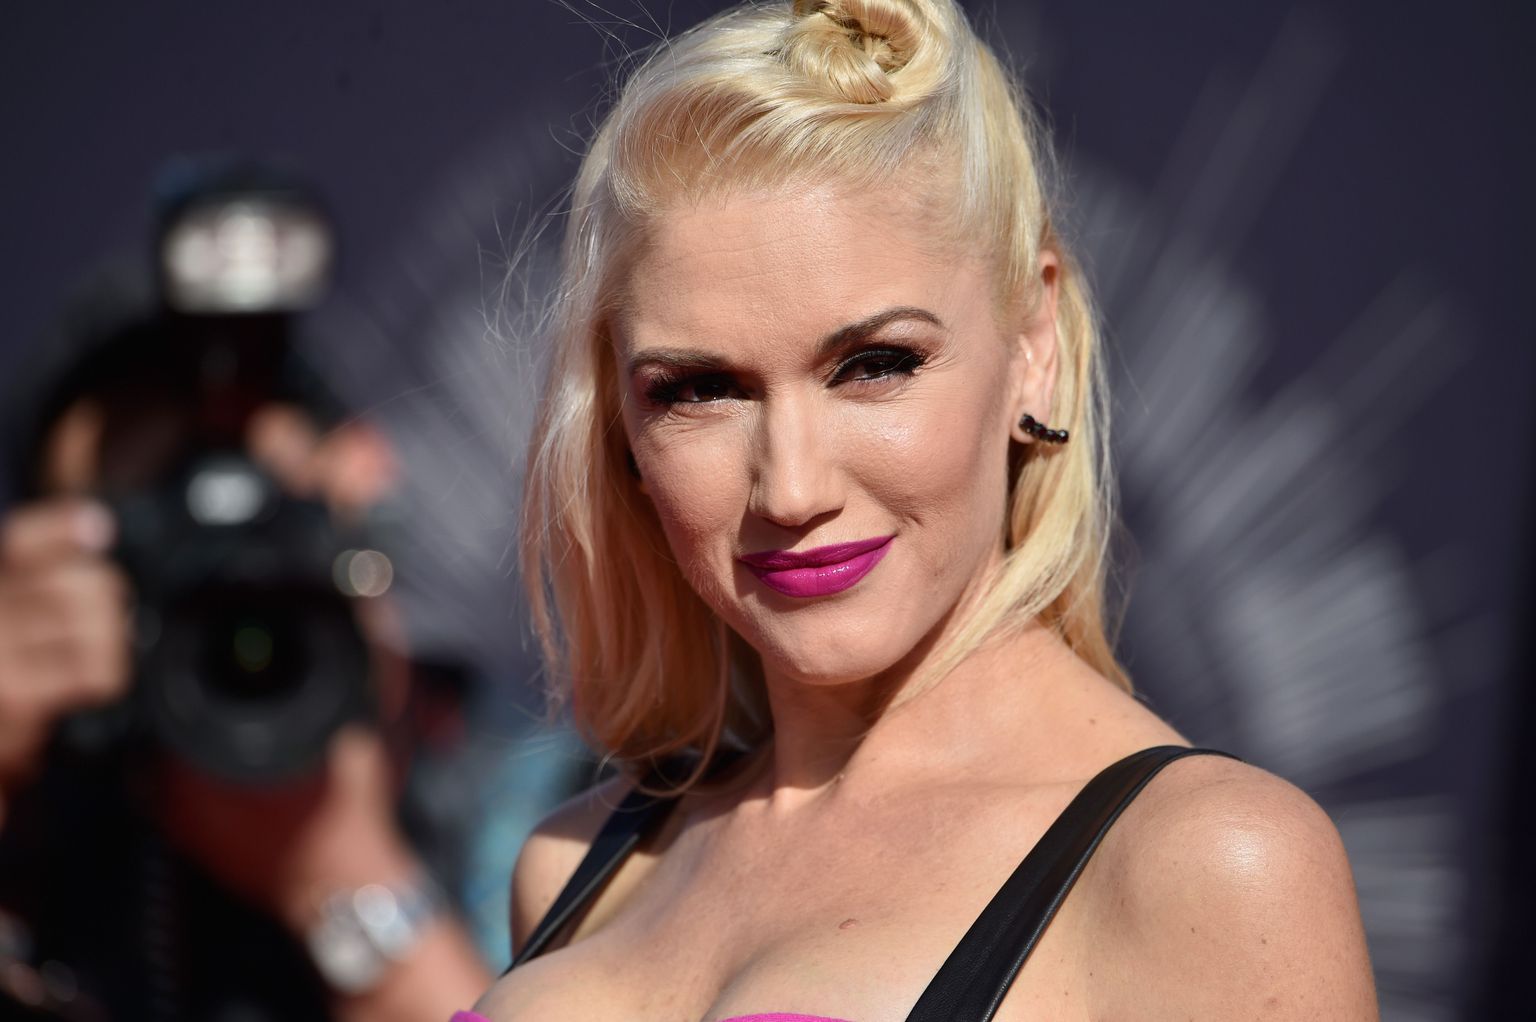 INGLEWOOD, CA - AUGUST 24: Recording artist Gwen Stefani attends the 2014 MTV Video Music Awards at The Forum on August 24, 2014 in Inglewood, California.   Frazer Harrison/Getty Images/AFP
== FOR NEWSPAPERS, INTERNET, TELCOS & TELEVISION USE ONLY ==